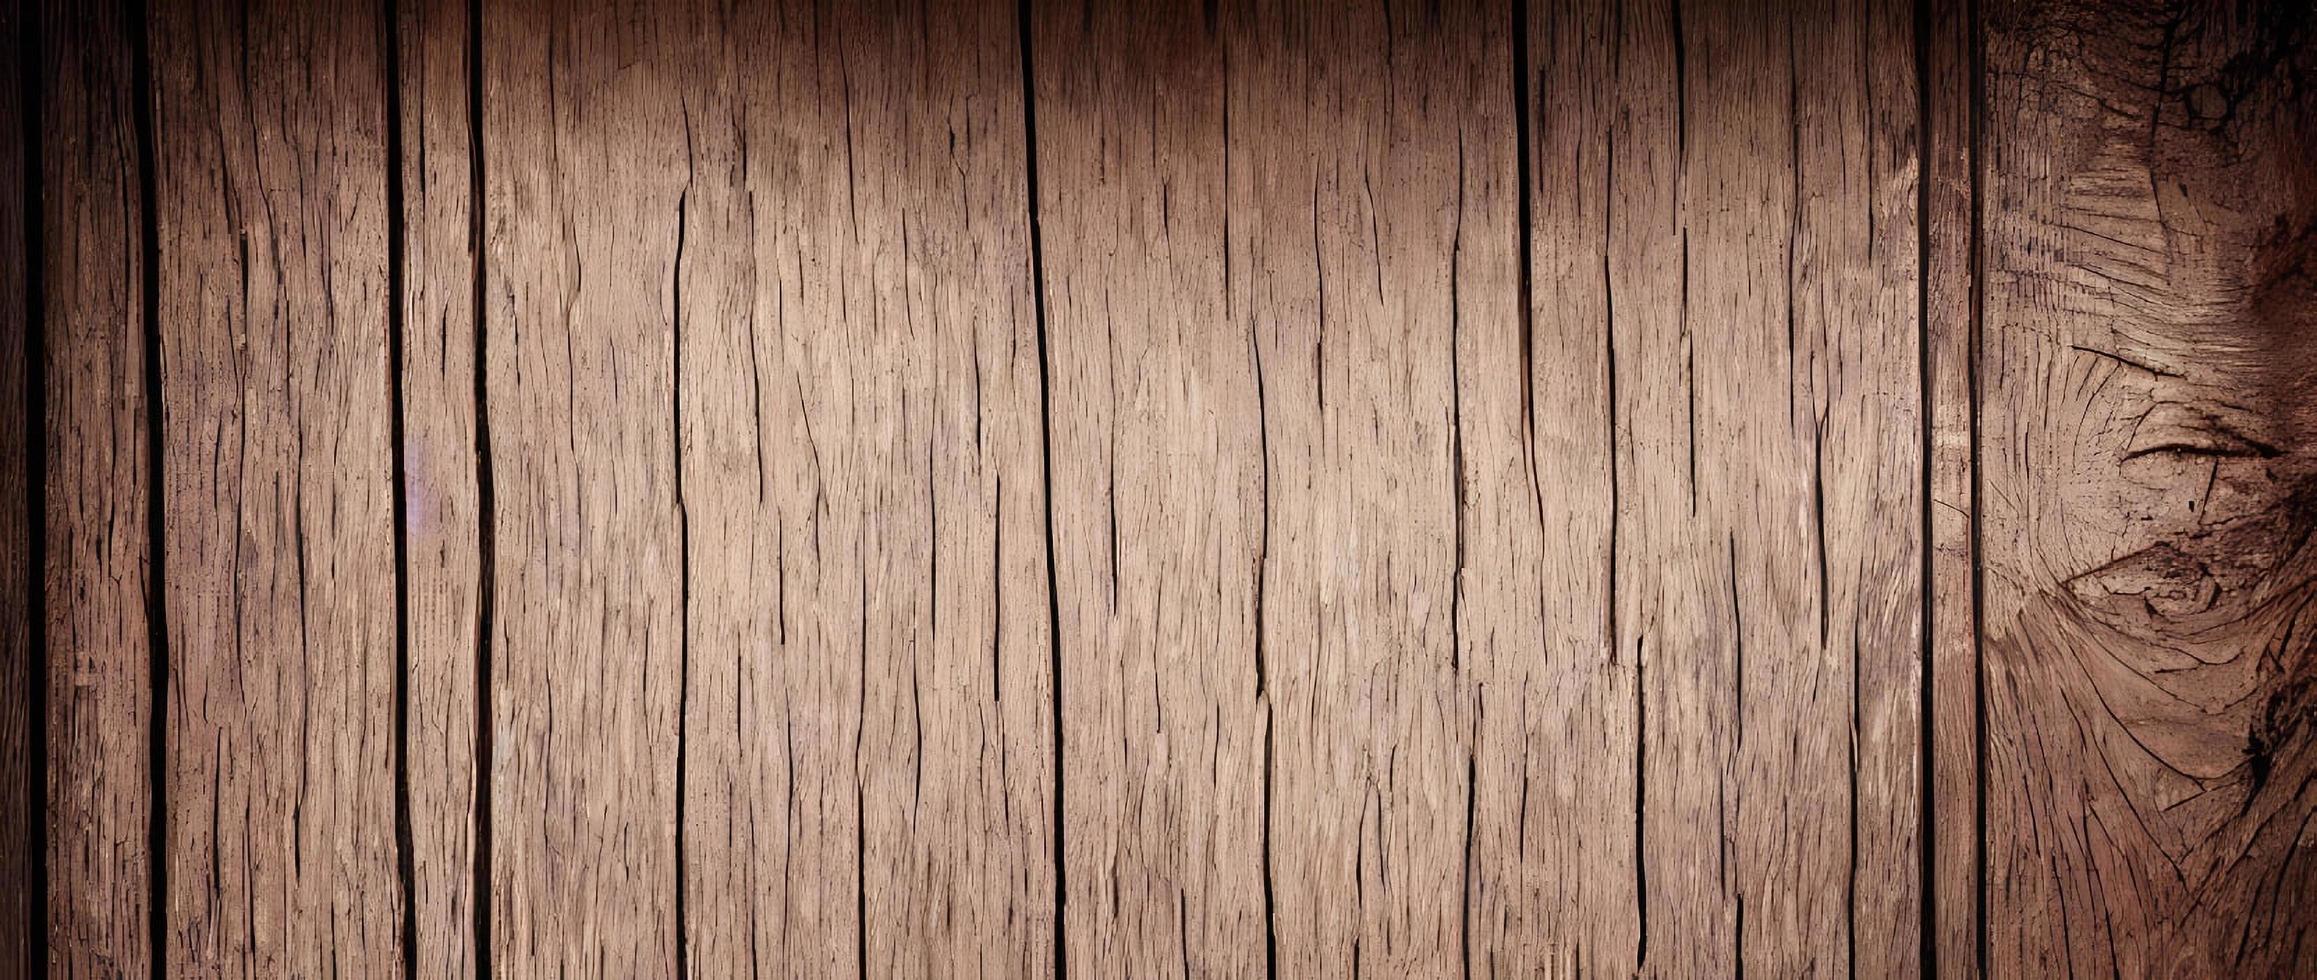 Wooden background or texture. photo